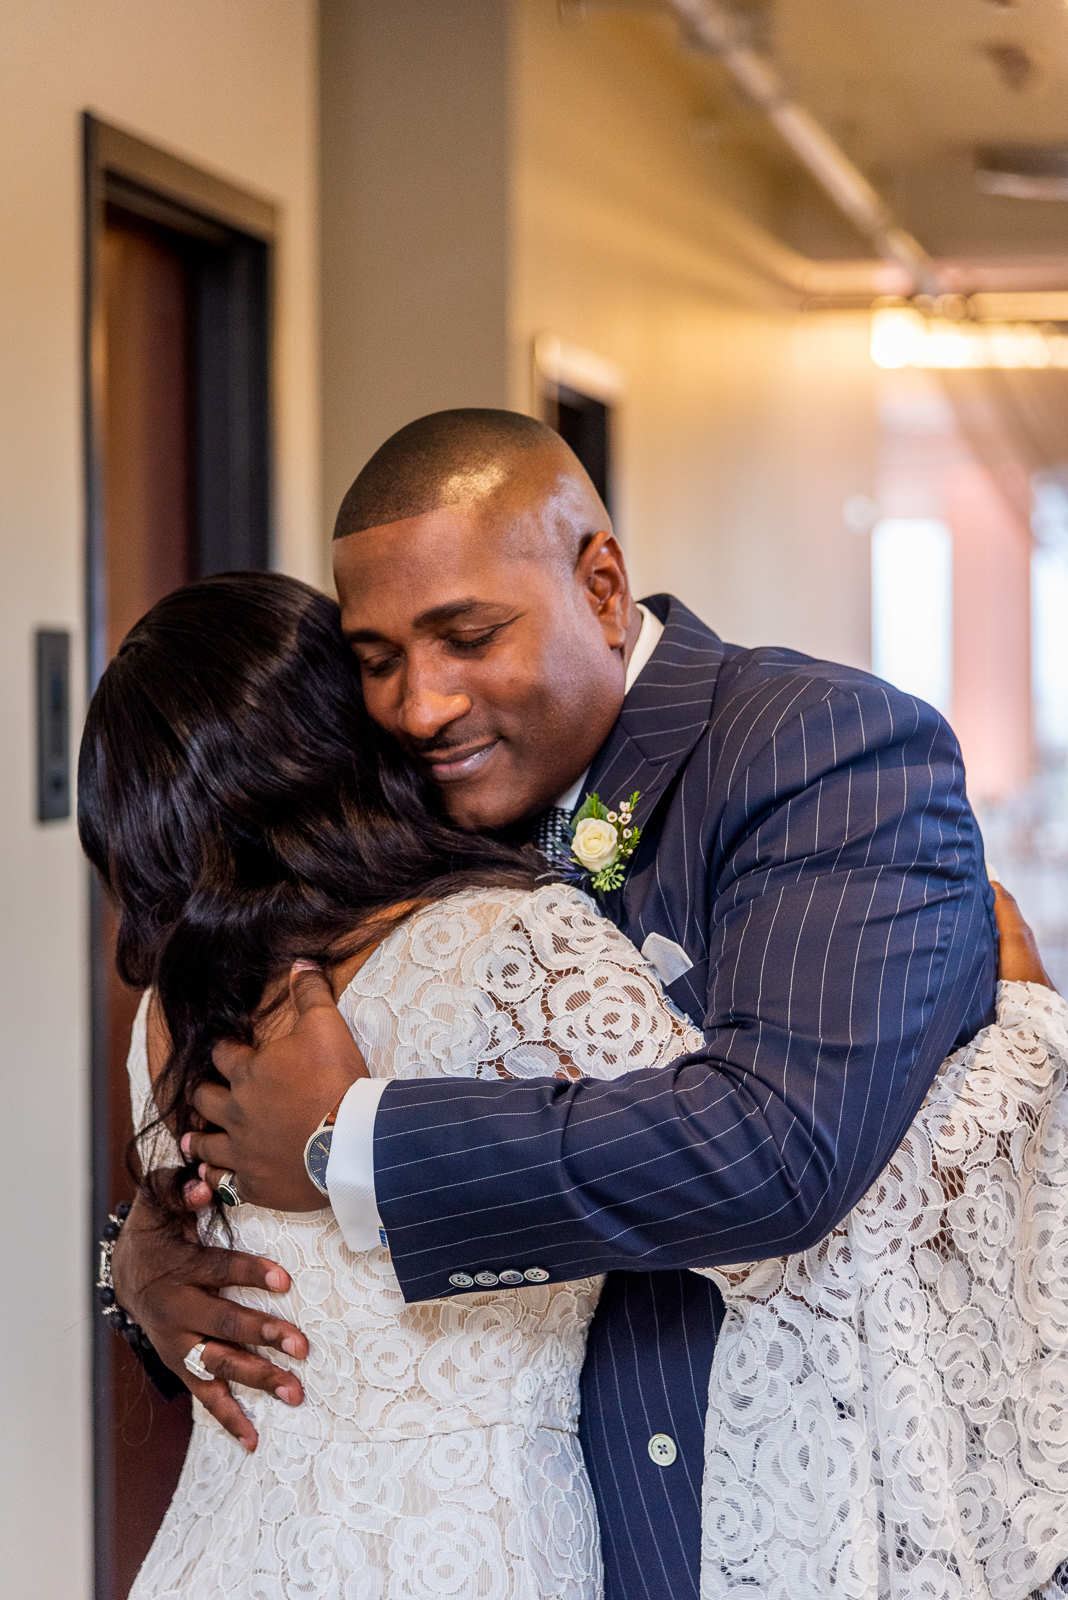 Bride with father, first look, hug, sweet, cute, pink light, pink uplighting, African American bride, African American wedding, urban wedding ceremony at Penthouse Events, Ohio City, Cleveland Flats